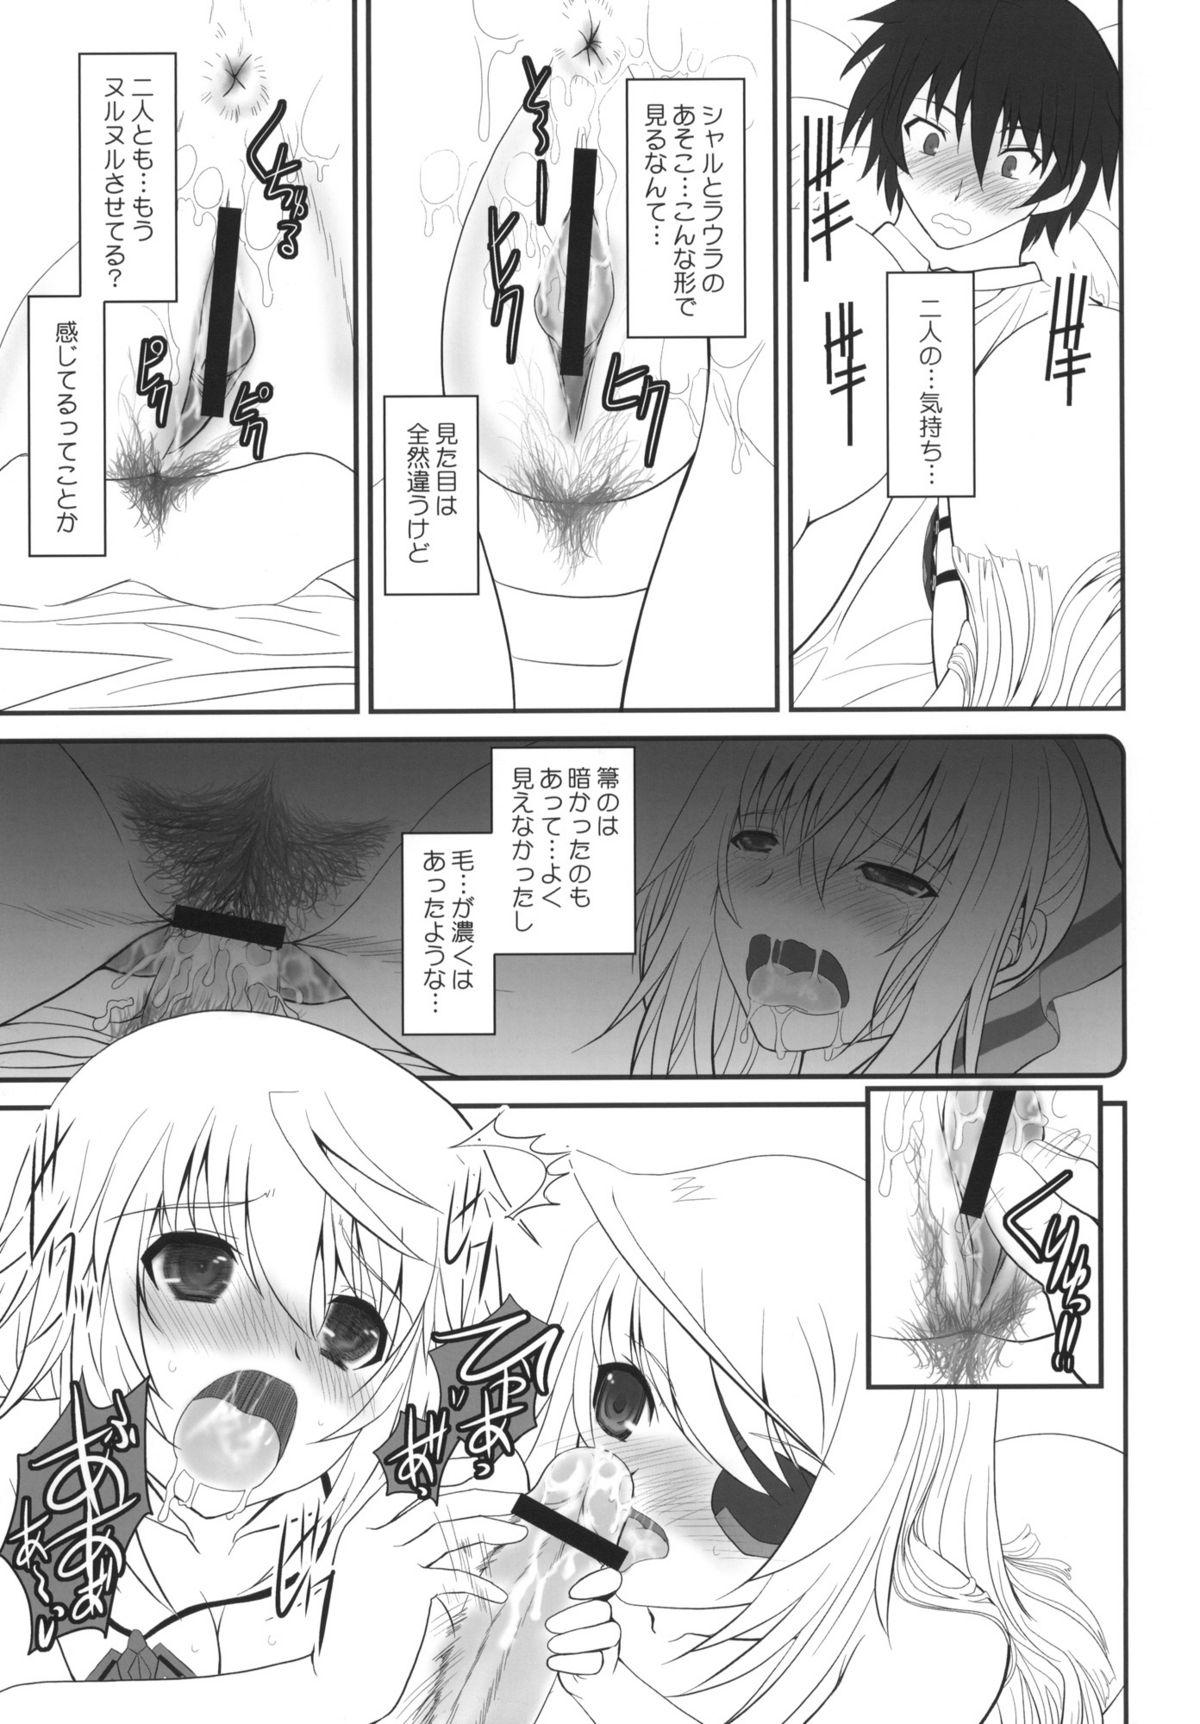 Spain IS-LAND - Infinite stratos Realamateur - Page 10